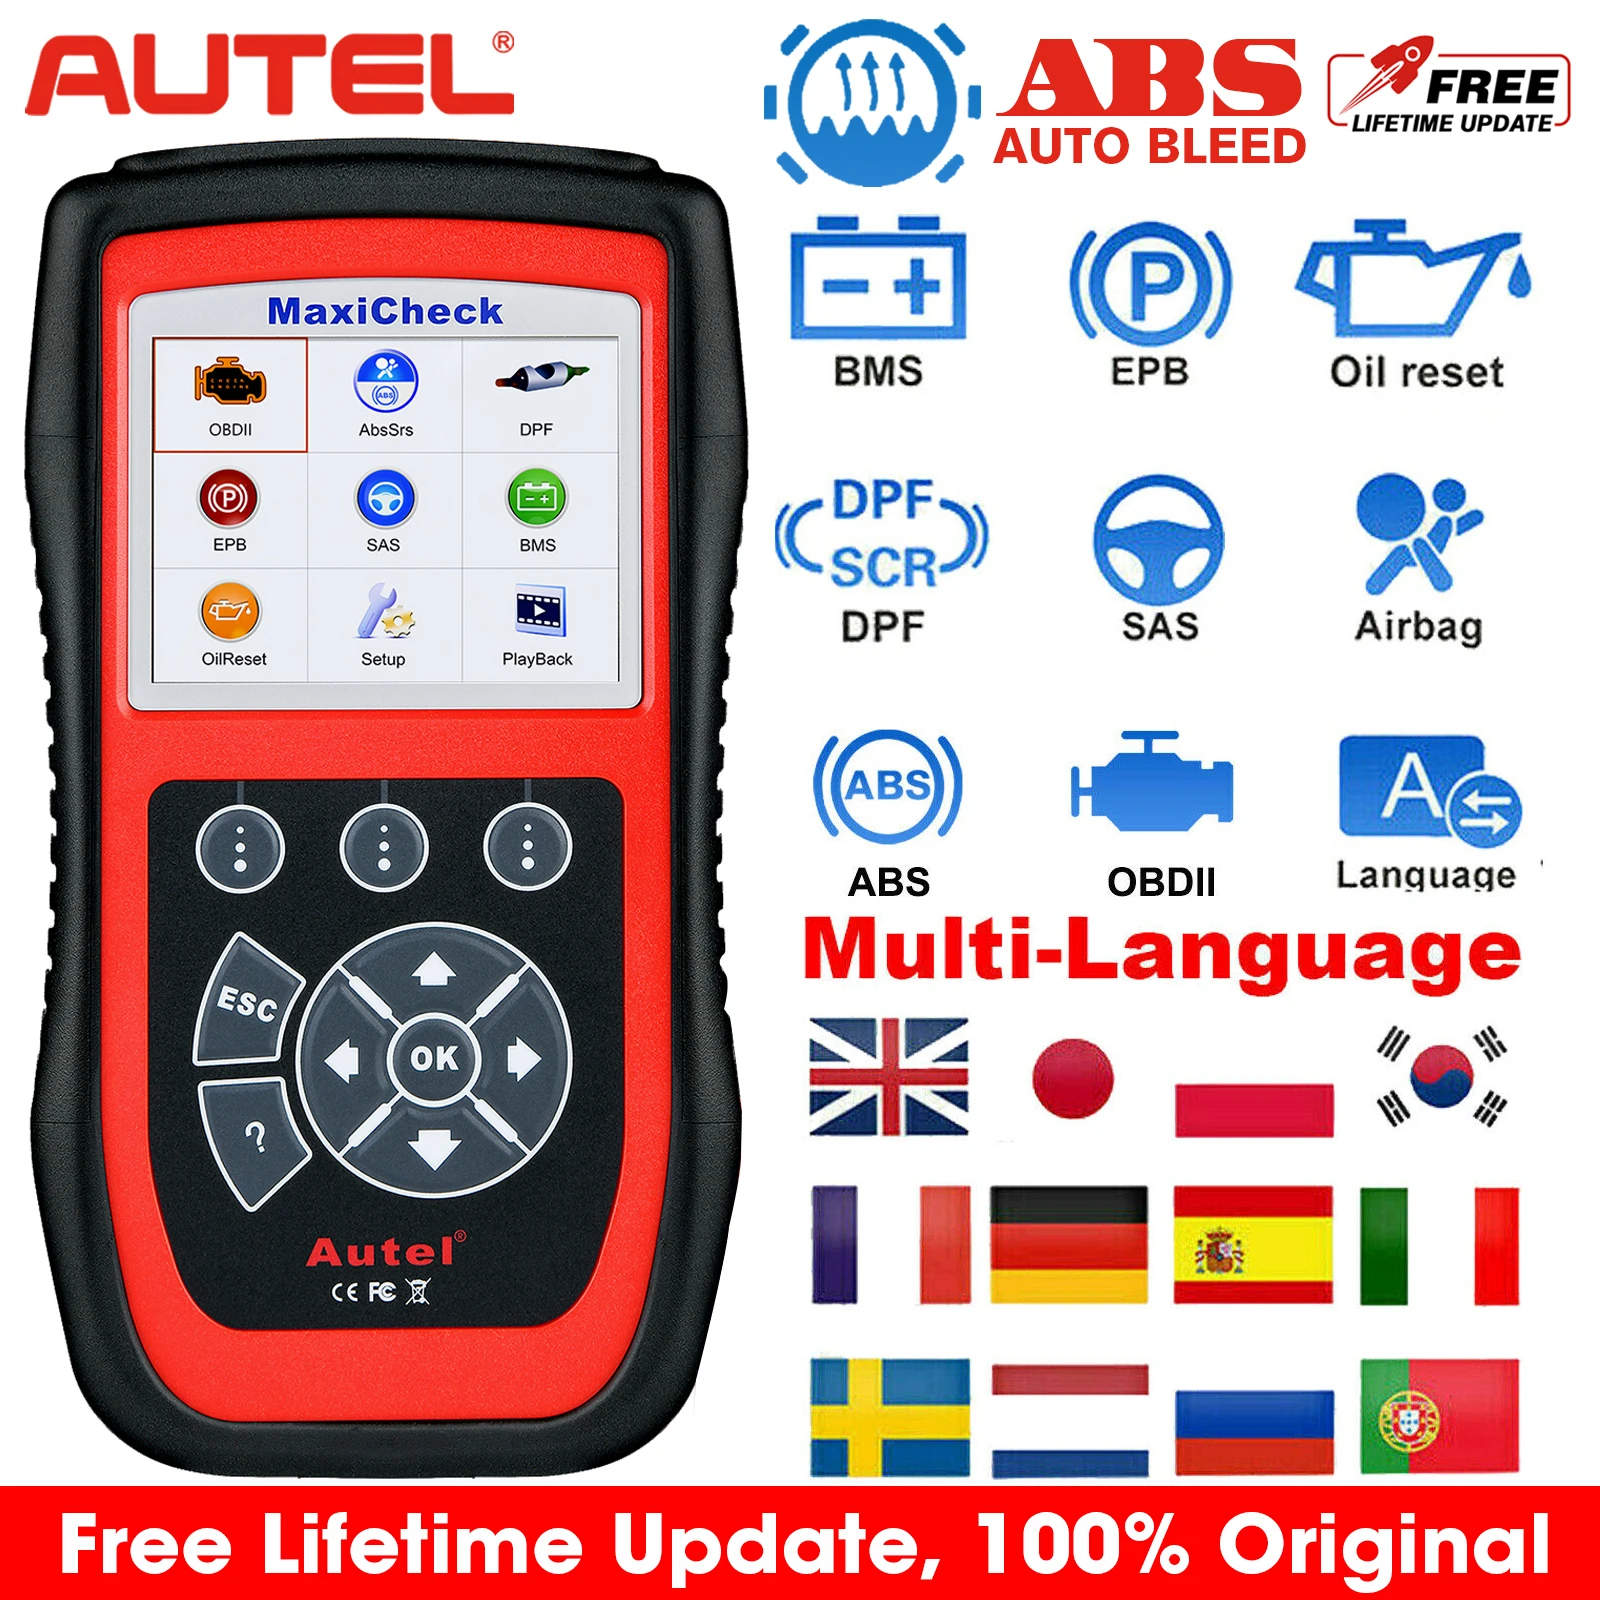 Autel Maxicheck Pro OBD2 Diagnostic Tool Car Code Scanner Airbag SRS EPB ABS DPF 